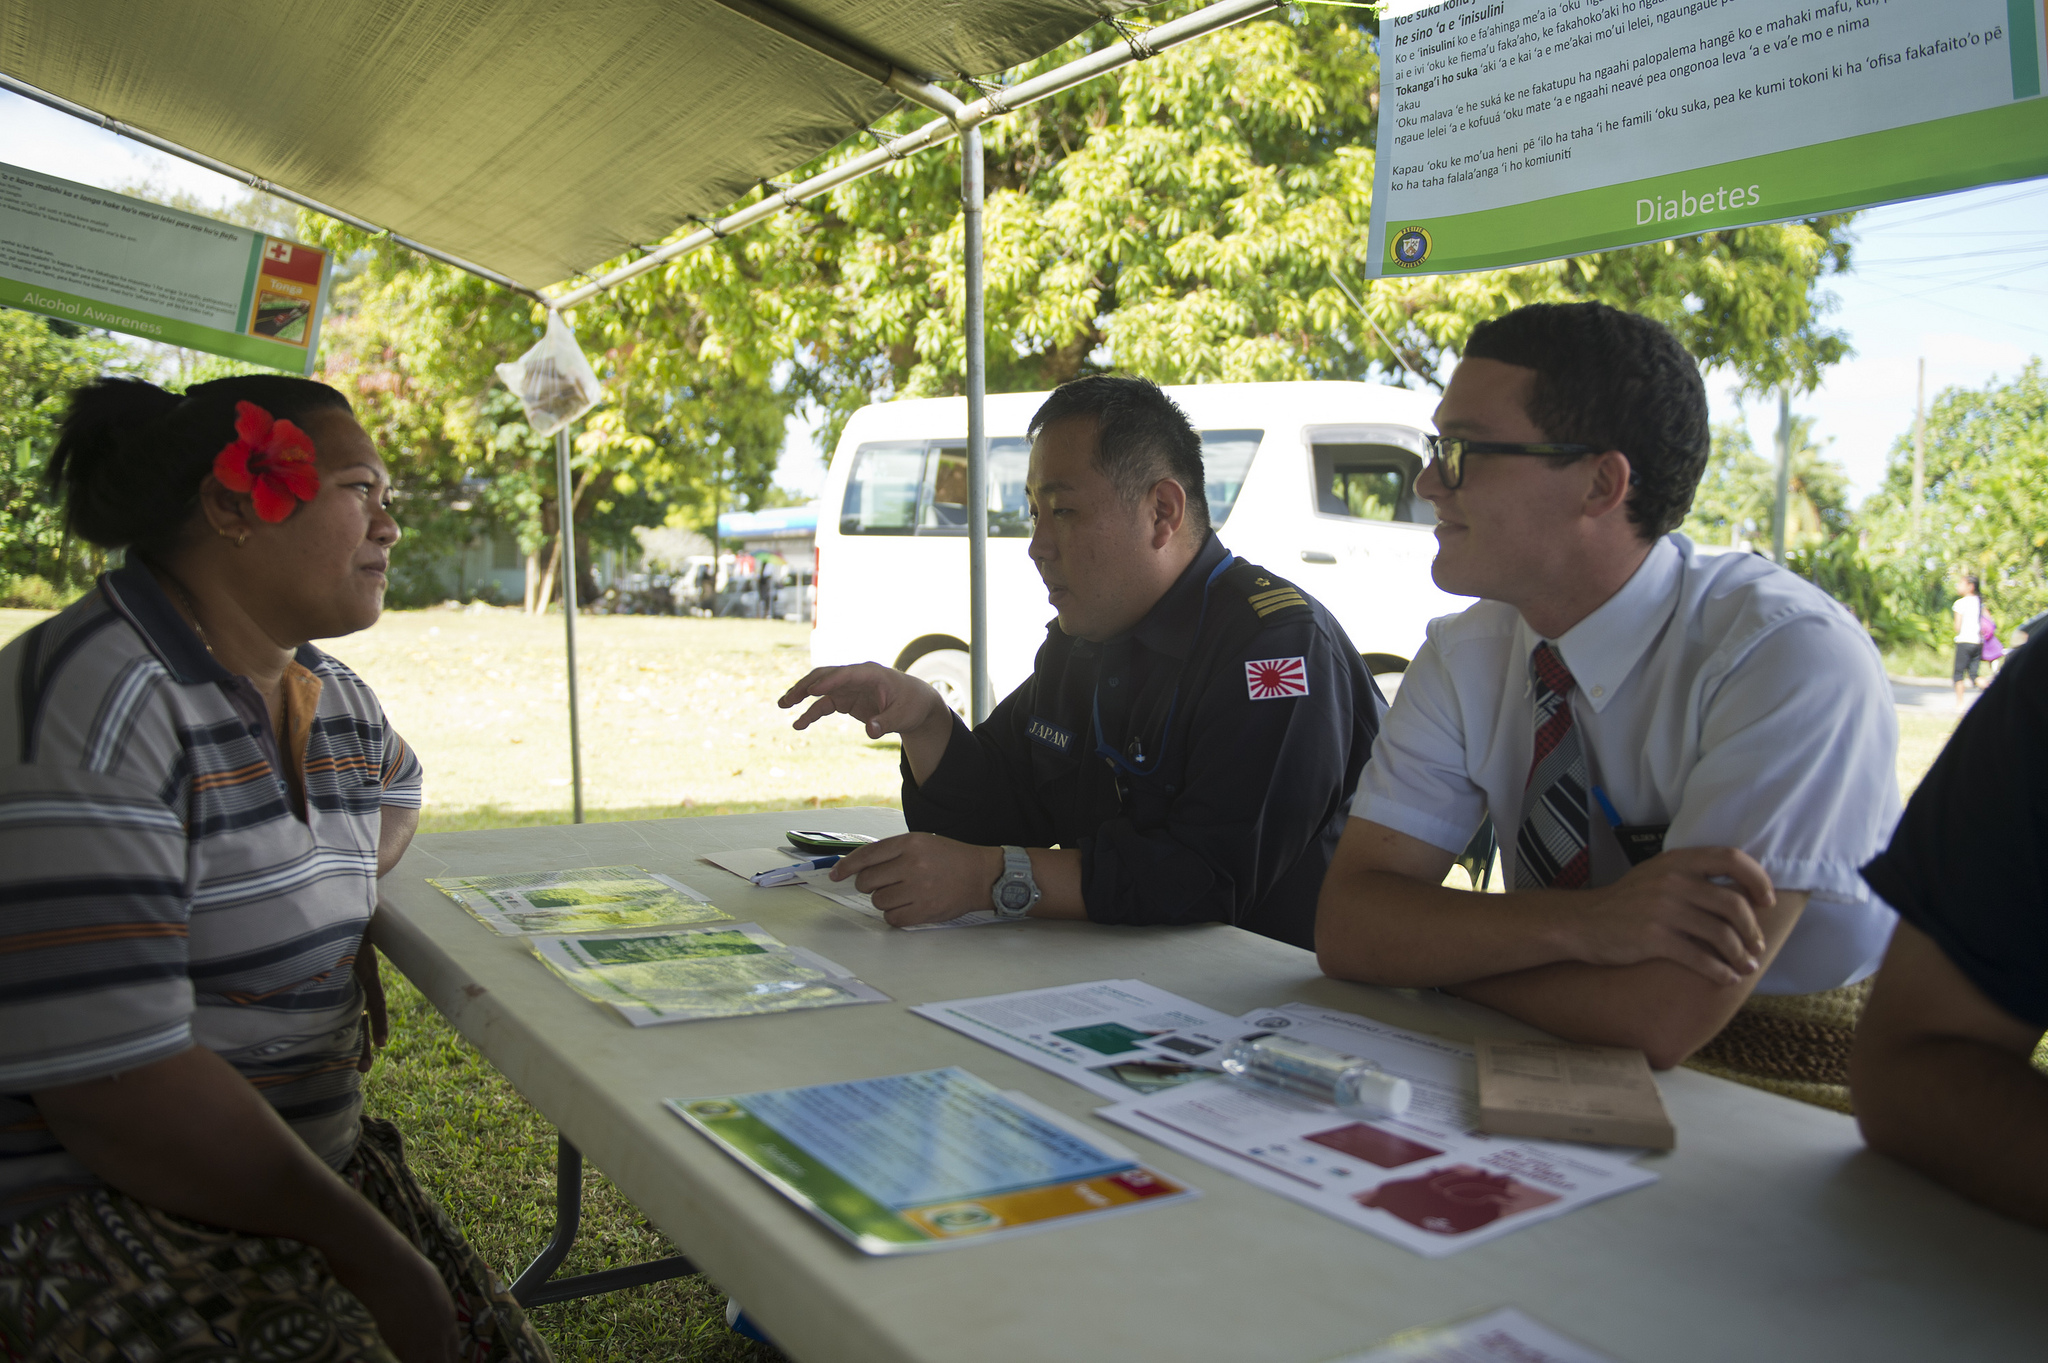 Discussing diabetes prevention at a health fair in Tonga during Pacific Partnership 2013 (US Pacific Fleet/Flickr/CC BY-NC 2.0)